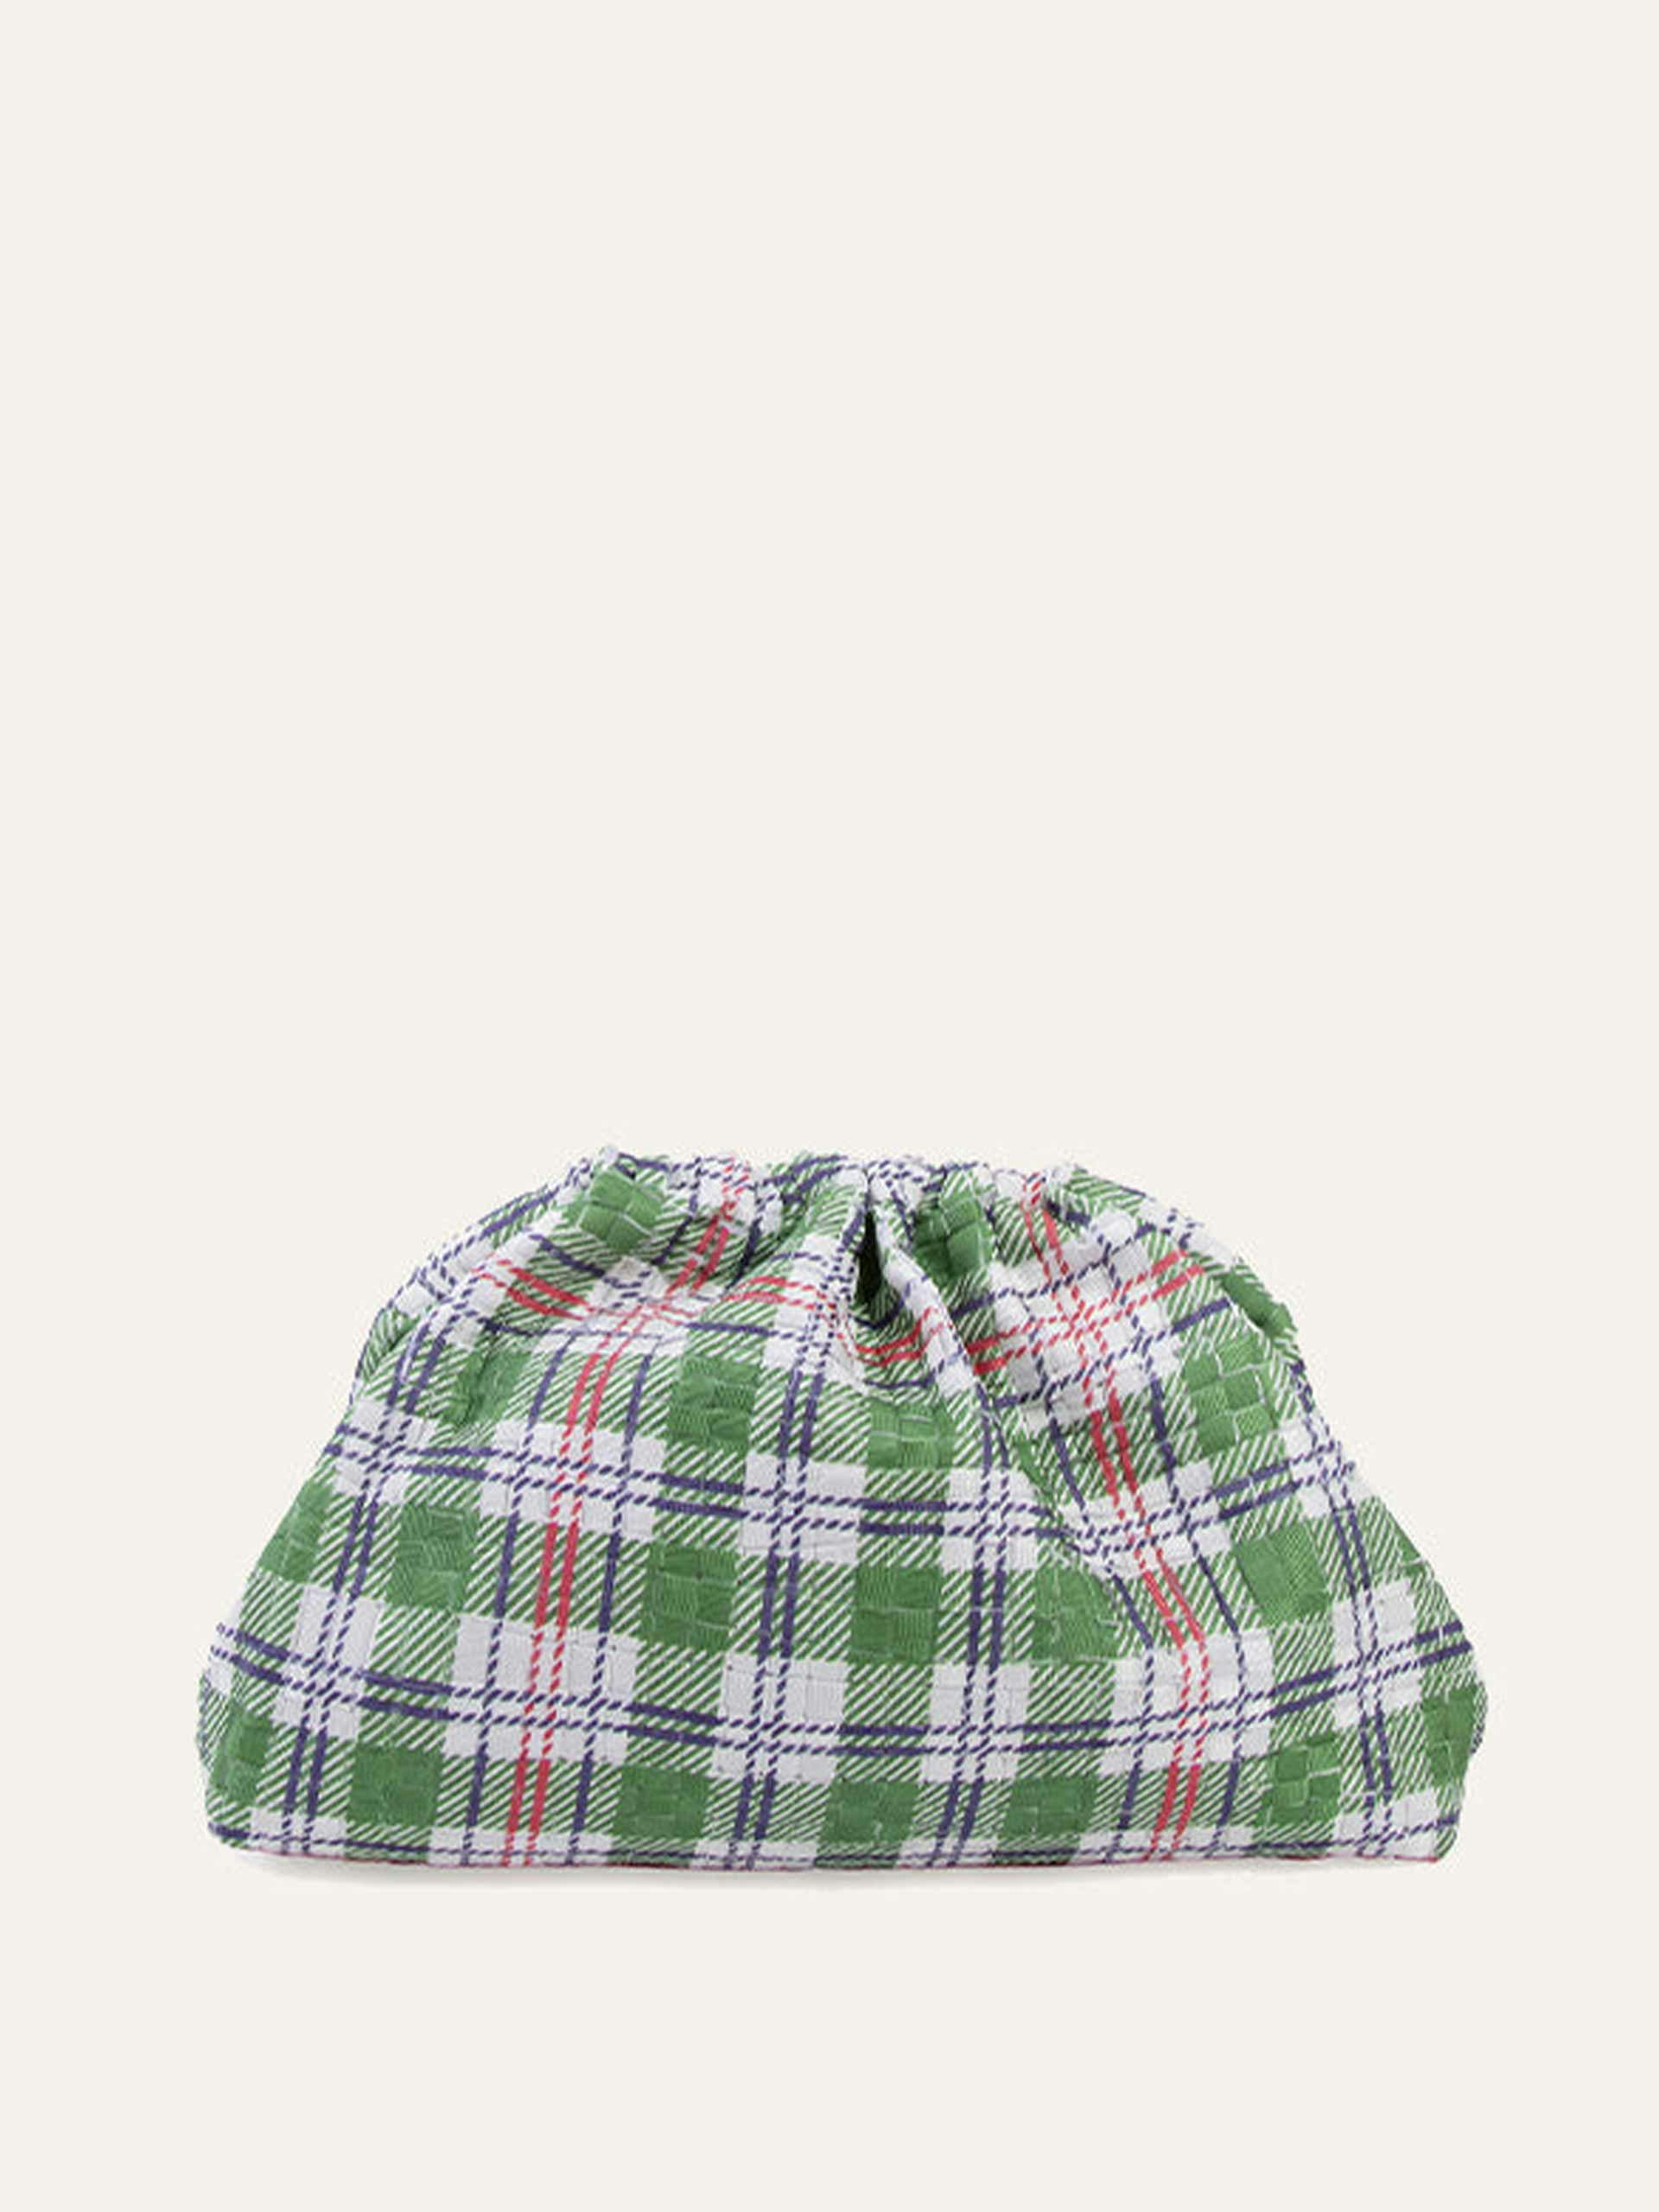 Green and blue gingham clutch